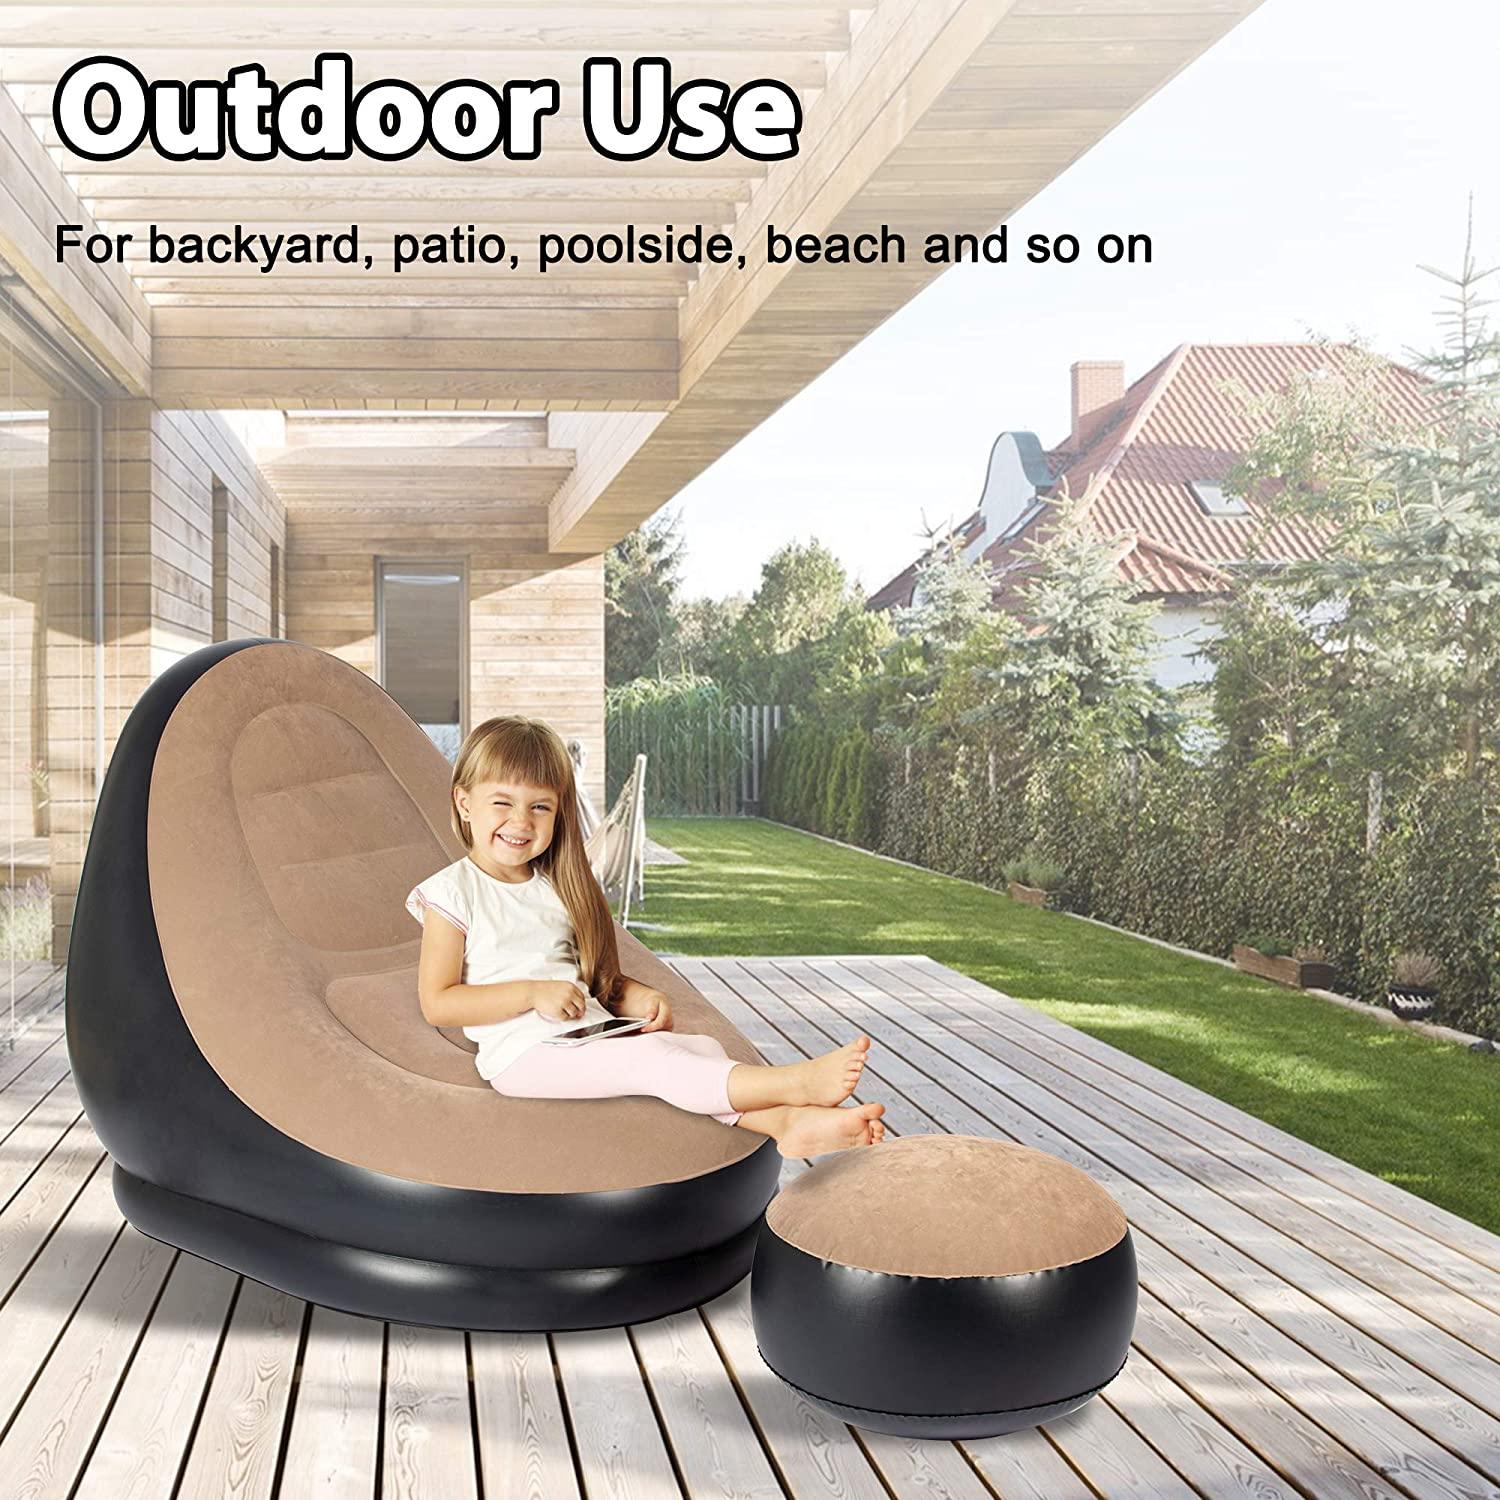 Blow Up Lounger Chair for Kids and Family with Ottoman - Portable Air Lazy Sofa Set - Bosonshop